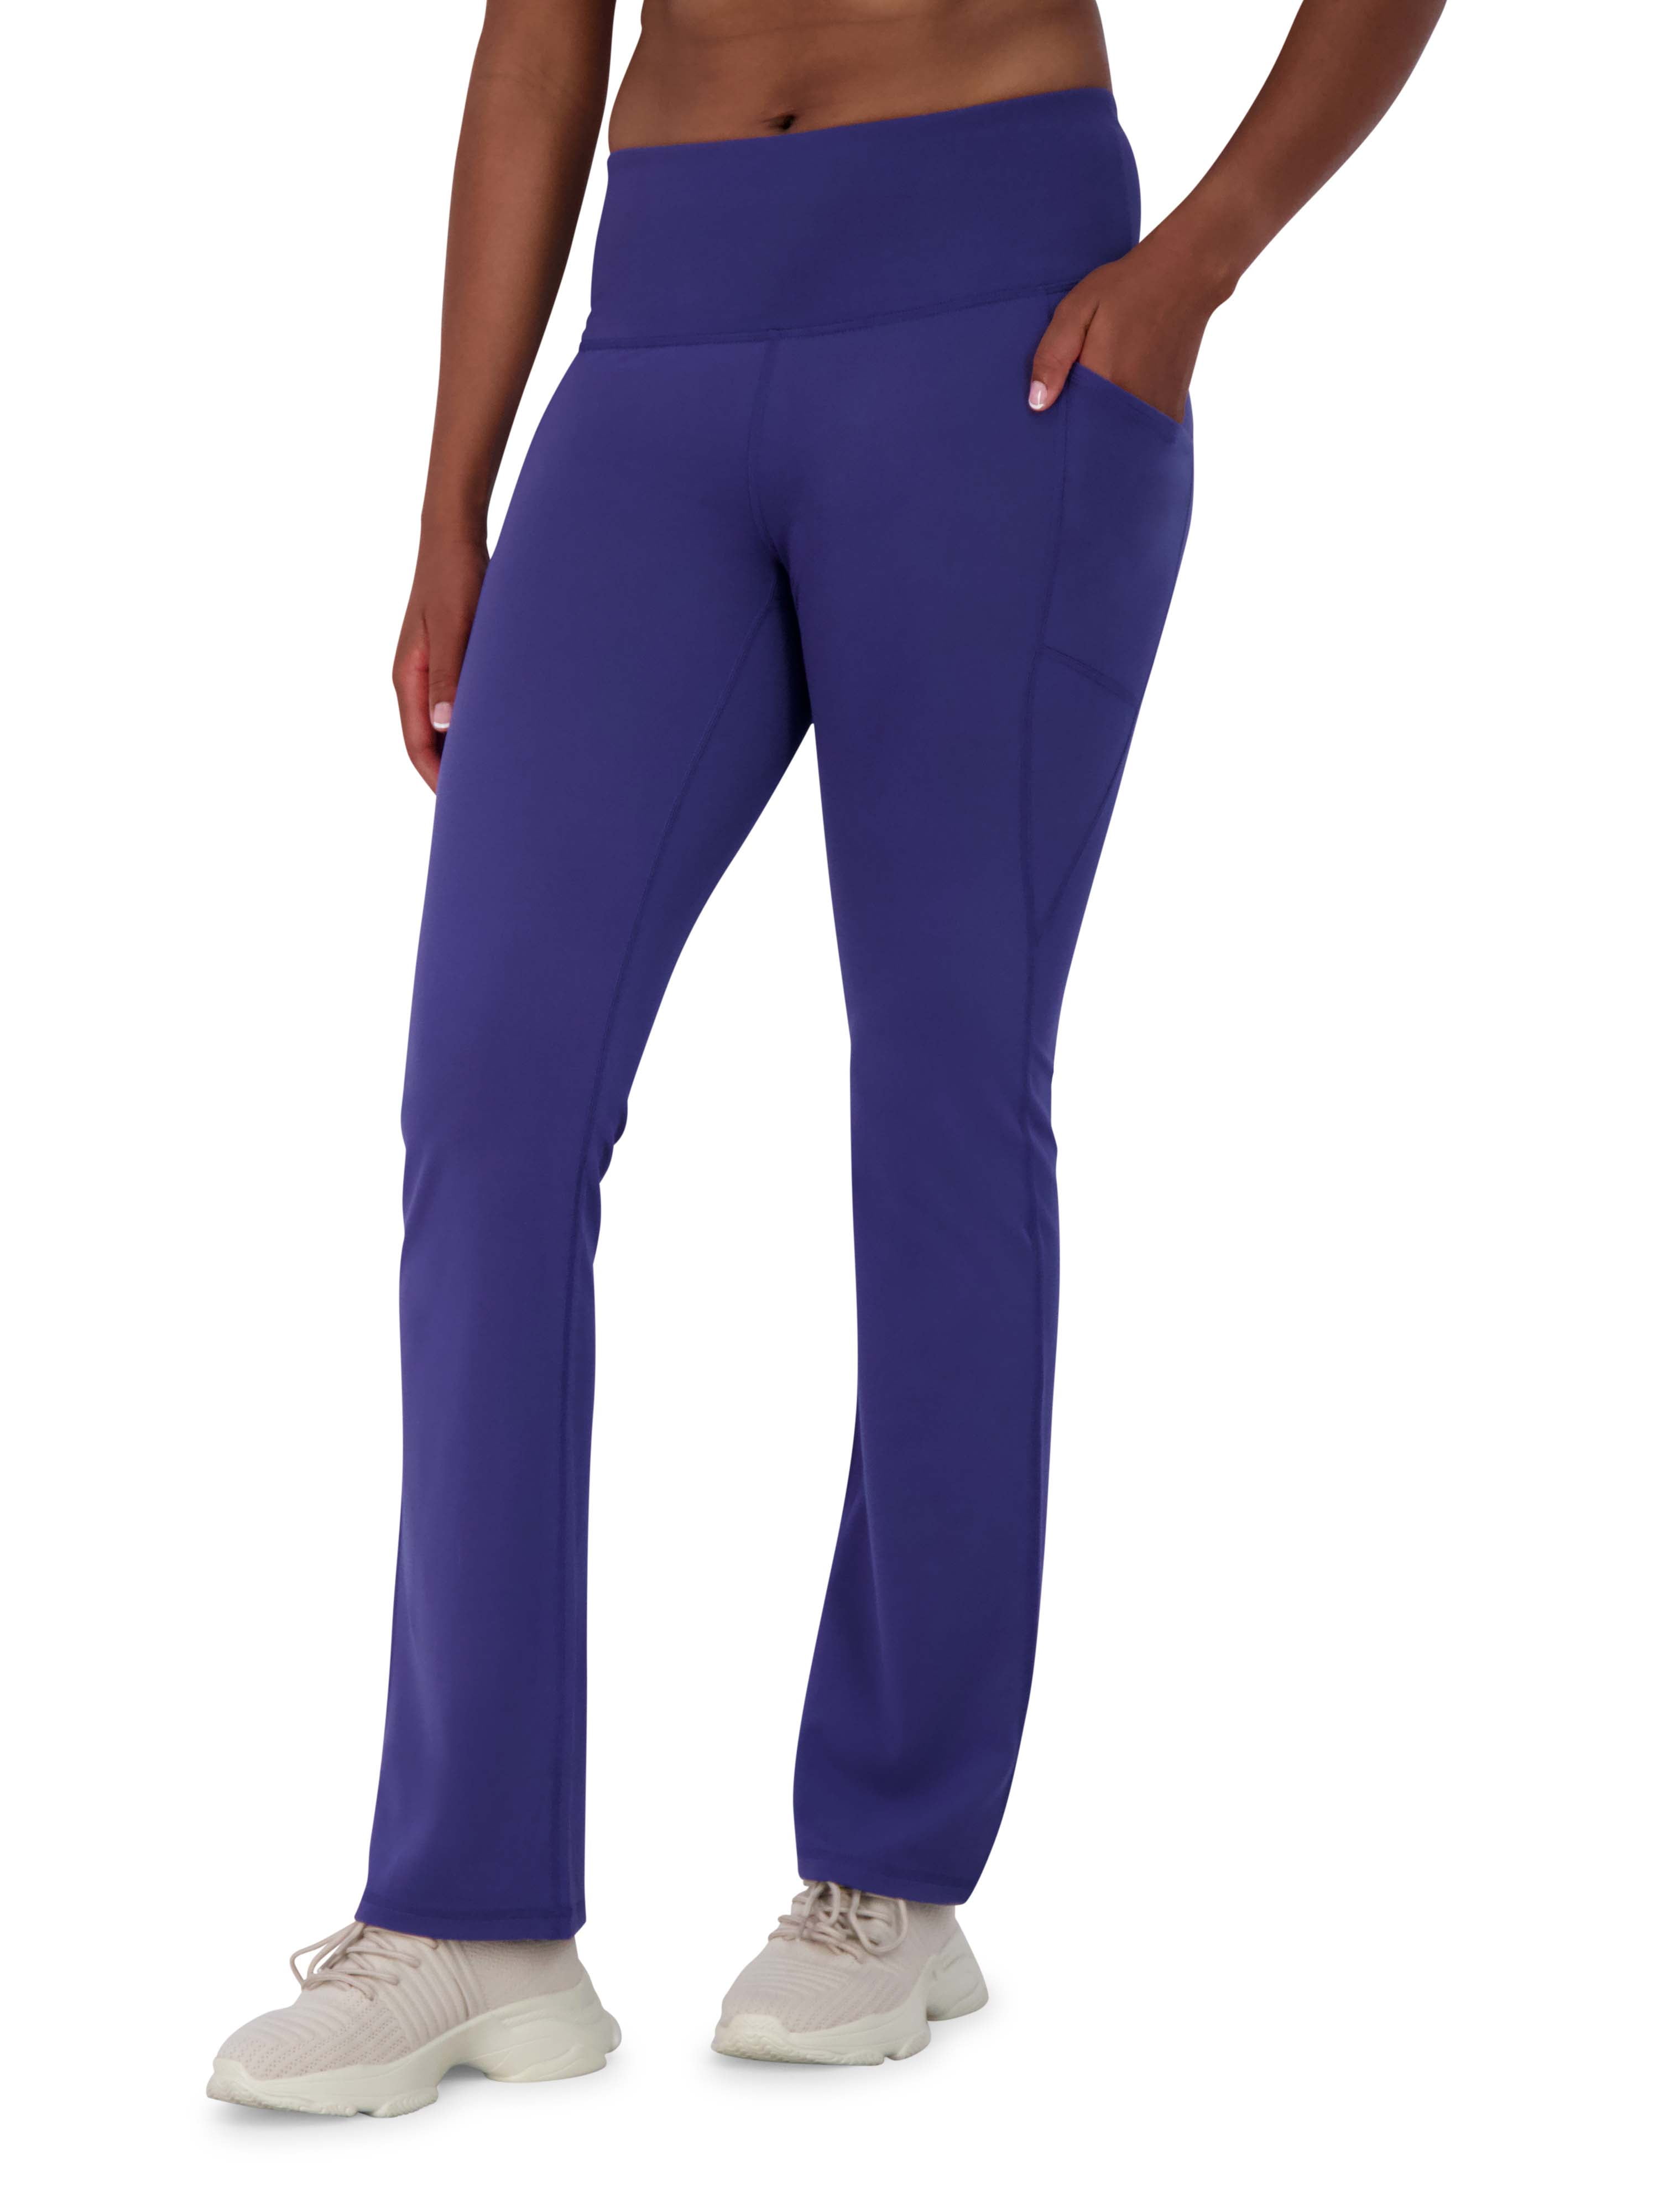 Reebok Women's Everyday High Waist Flair Bottom Yoga Pants with Pockets and  31 Inseam 